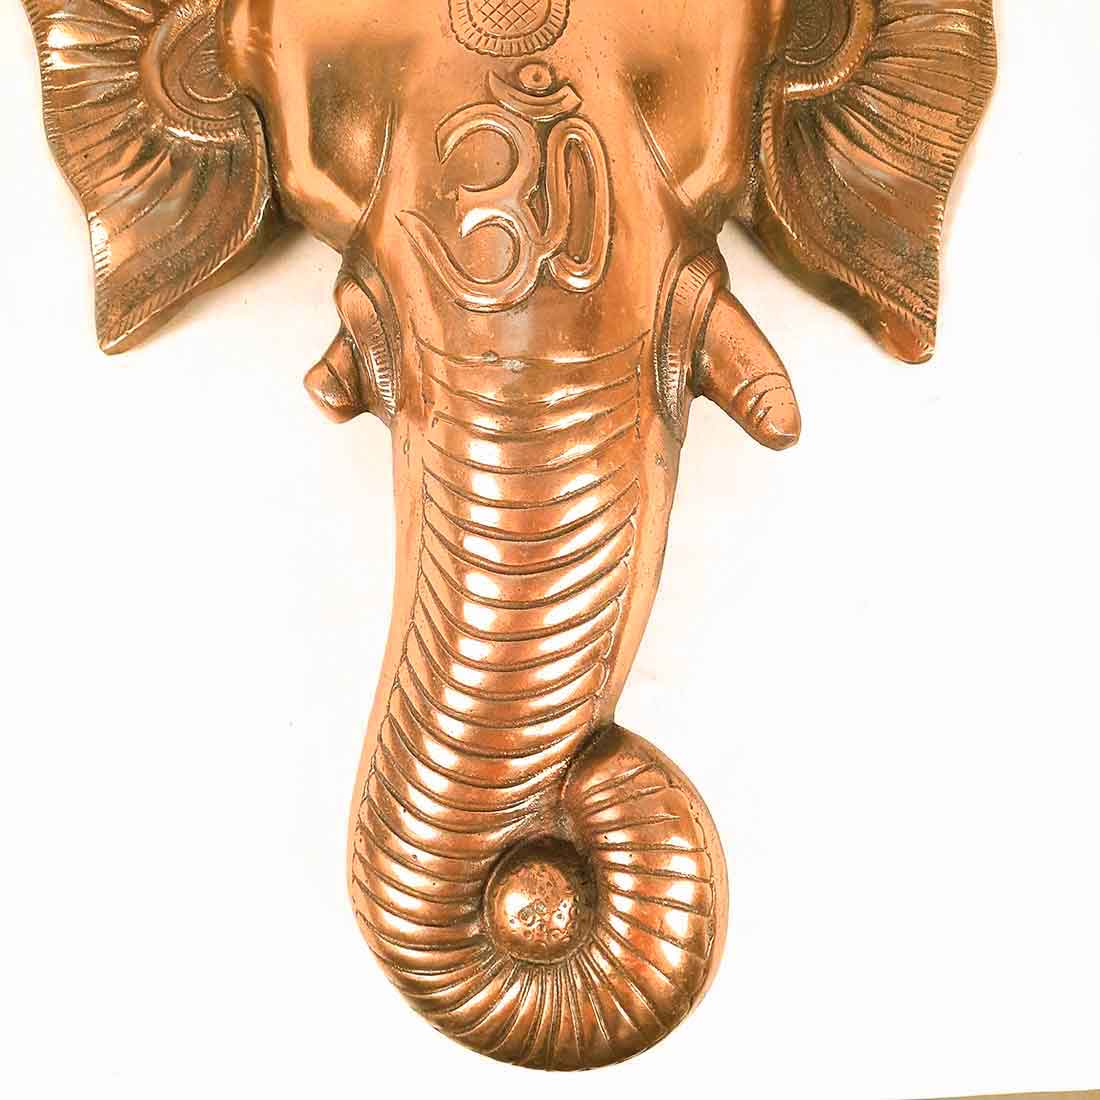 Lord Ganesh Face Wall Art For Pooja, Temple & Office Decor -27 Inch - ApkaMart